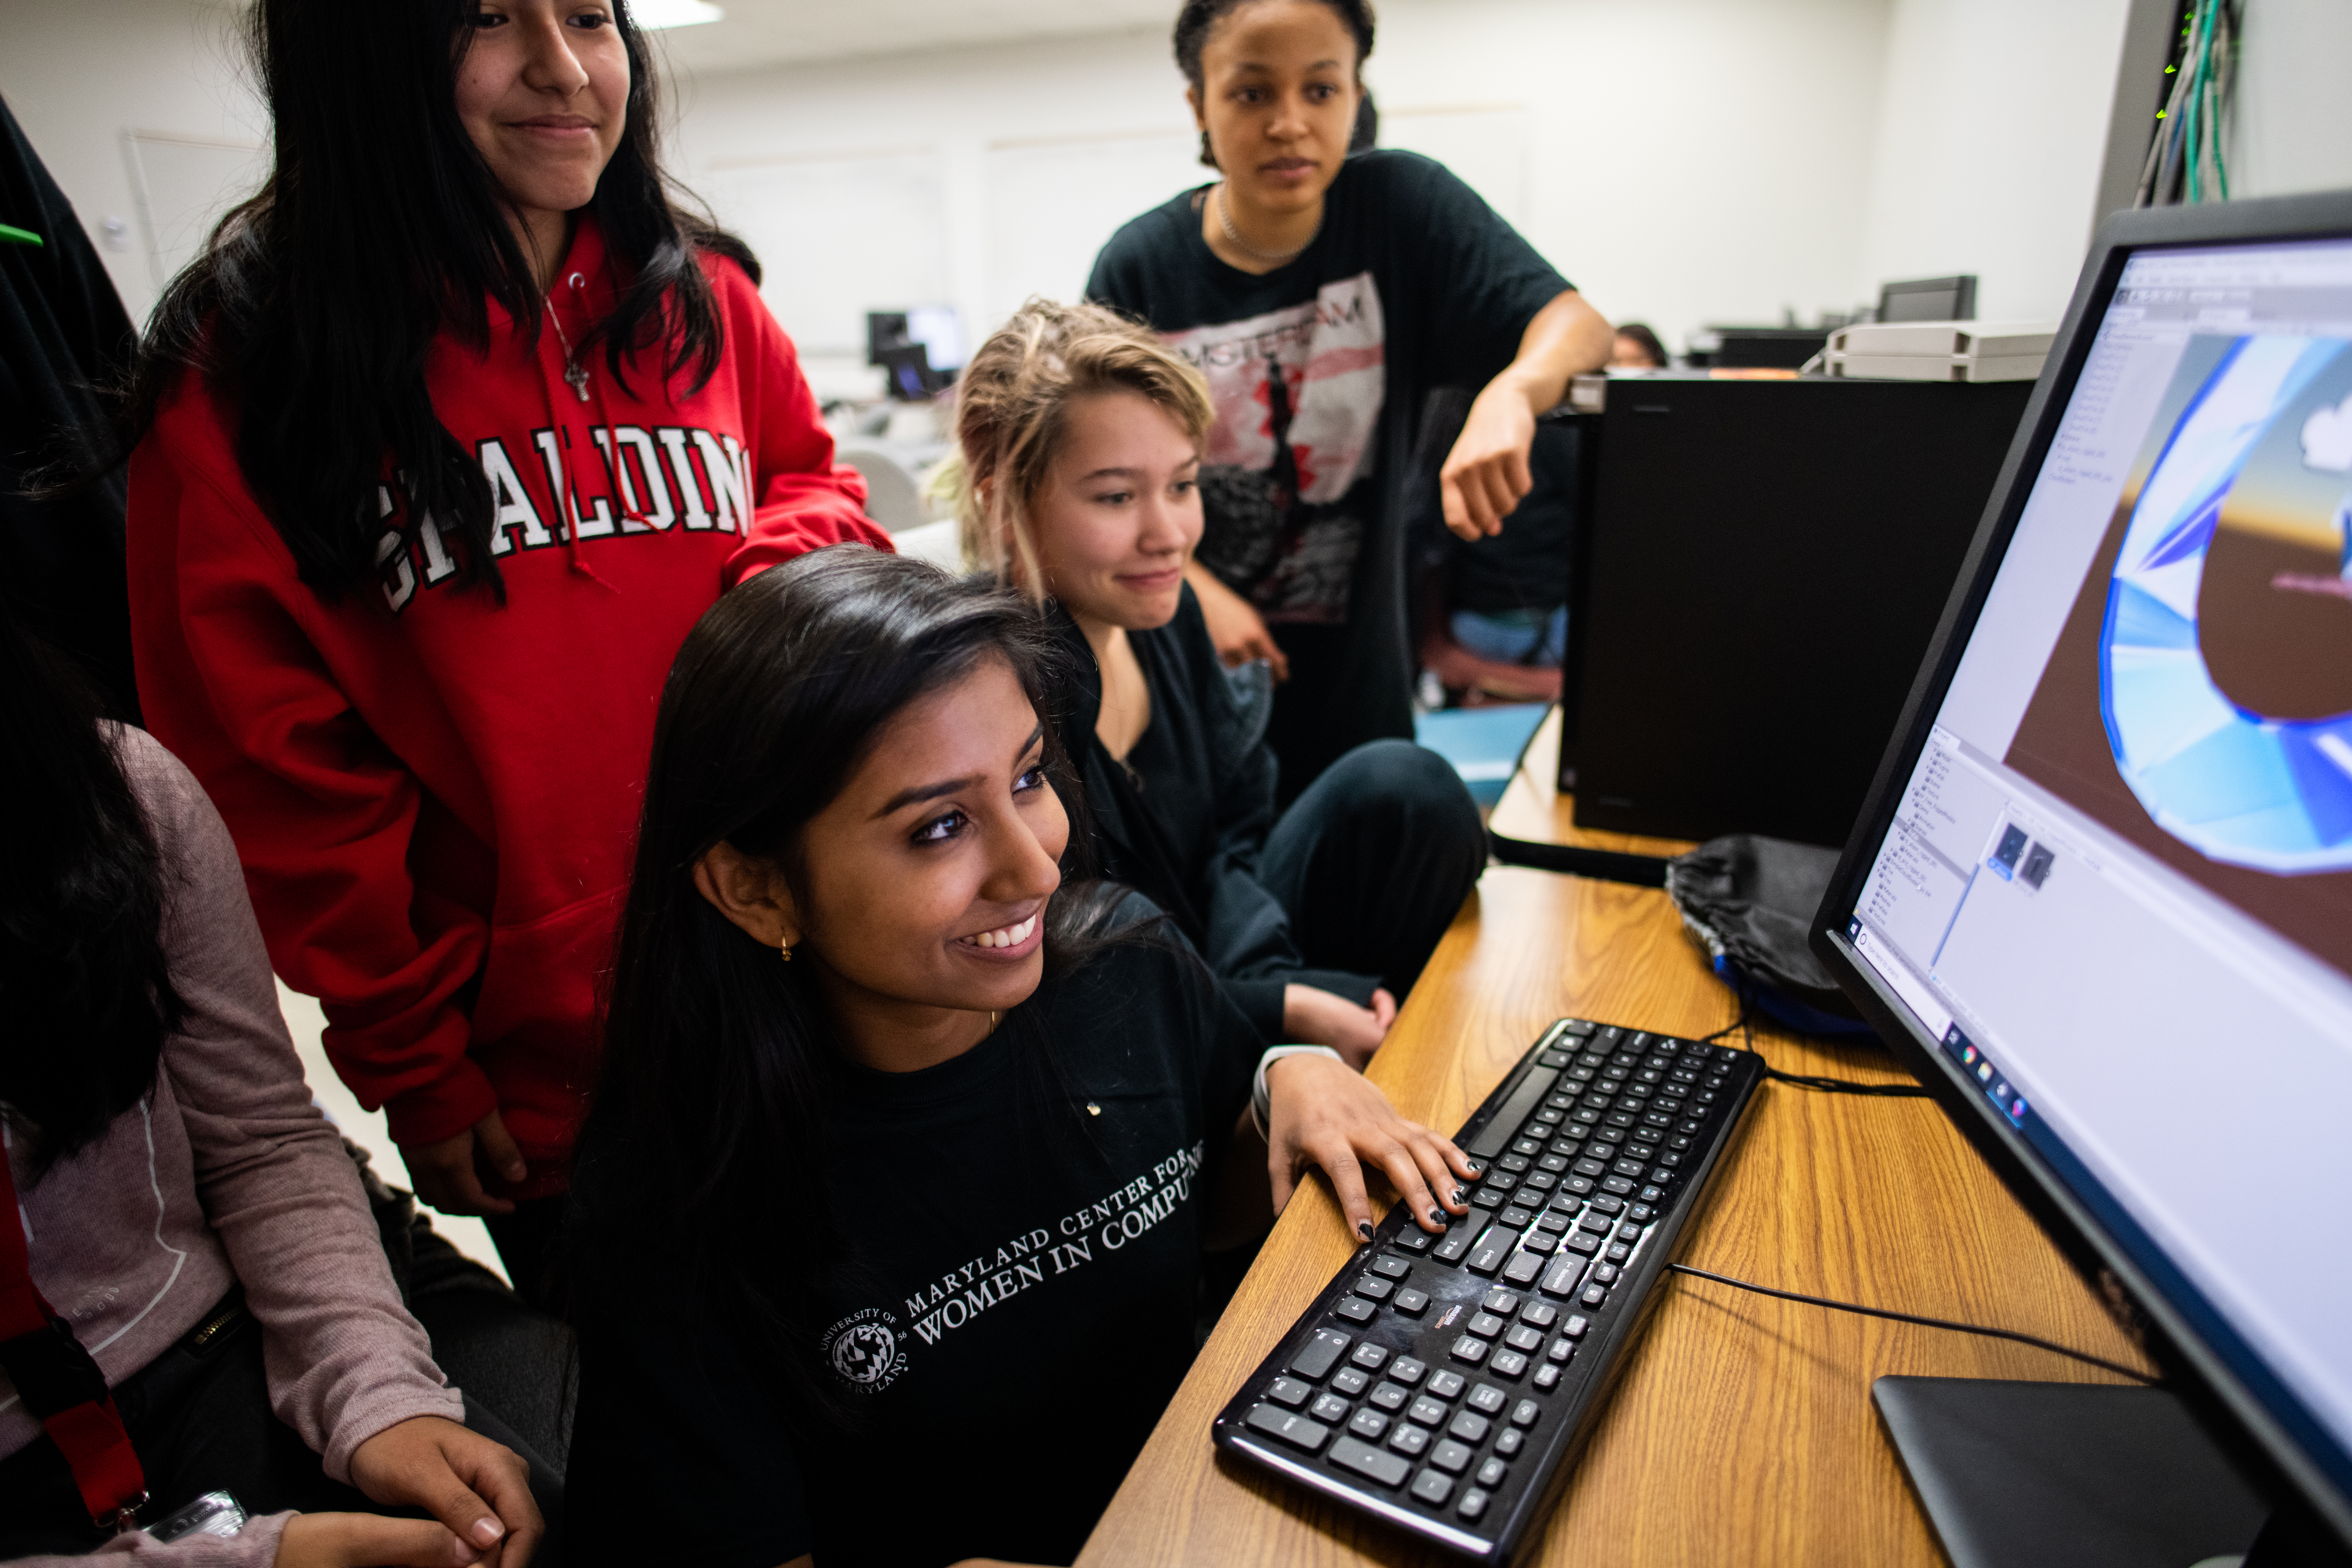 Freshman computer science major Utsa Santhosh helps participants in a weekend computing event hosted by the Maryland Center for Women in Computing. Image credit: Justin Derato (Click image to download hi-res version)